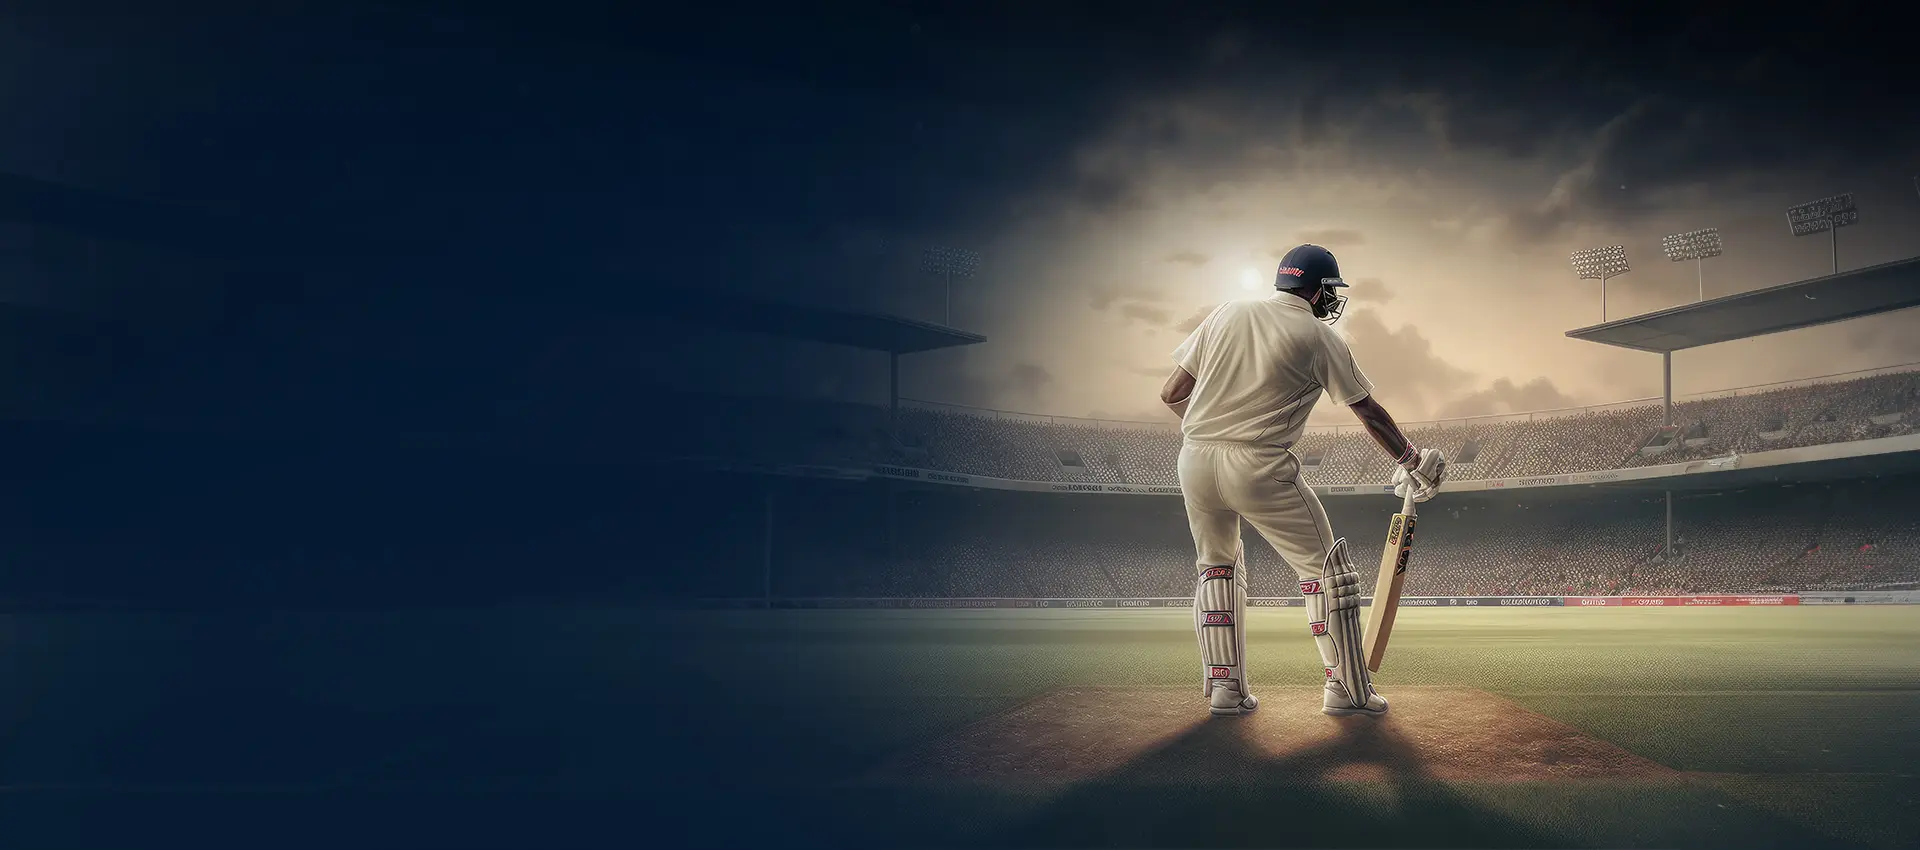 Cricket, Cloud, and AWS – A Story that Needs to be Told